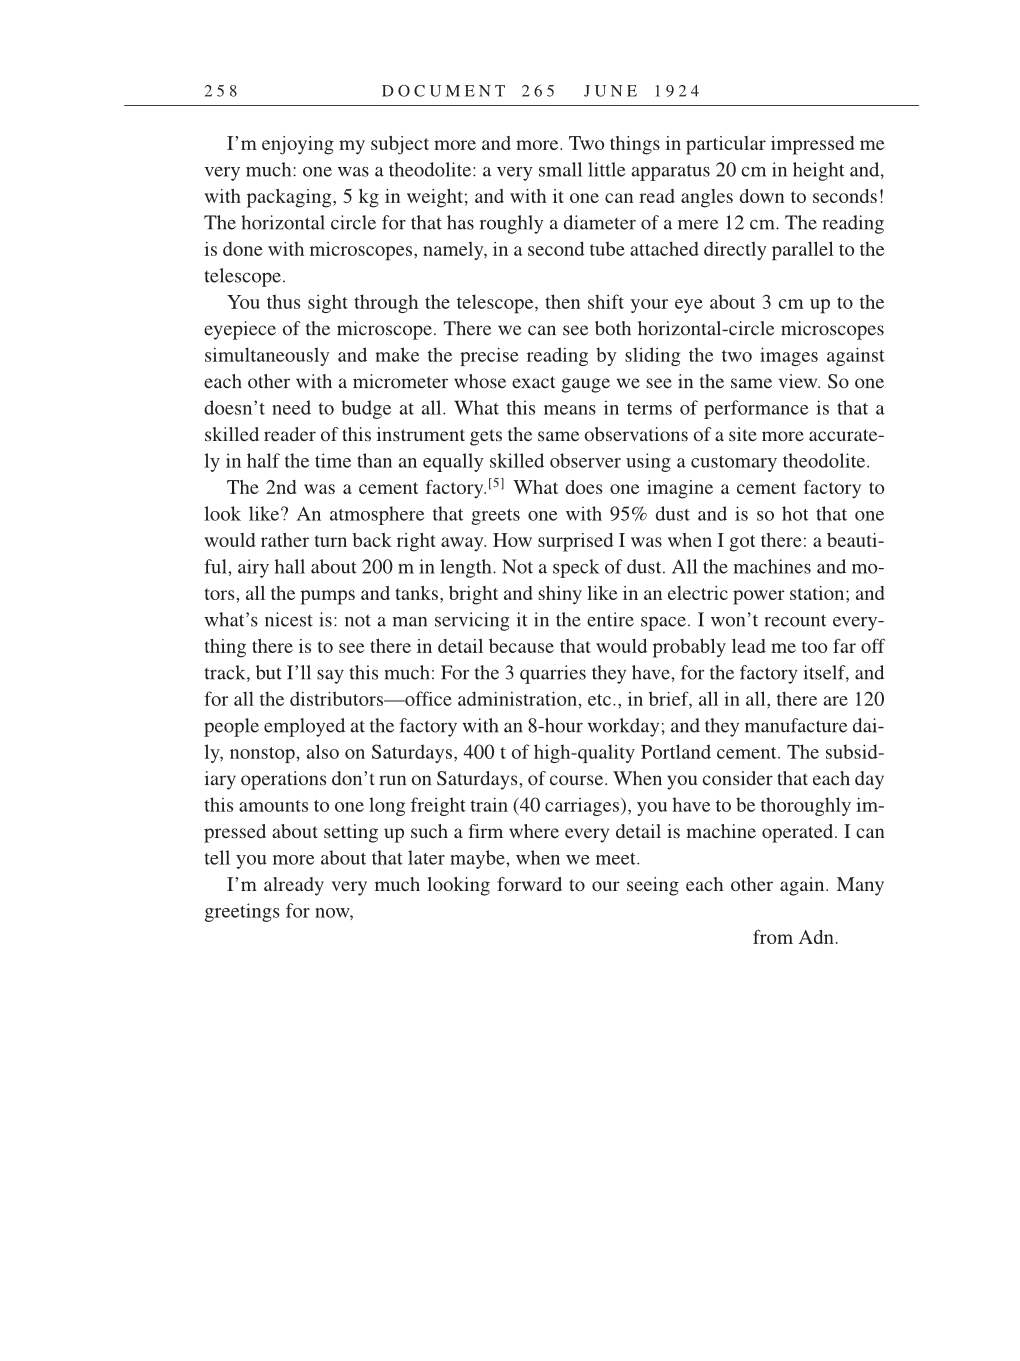 Volume 14: The Berlin Years: Writings & Correspondence, April 1923-May 1925 (English Translation Supplement) page 258